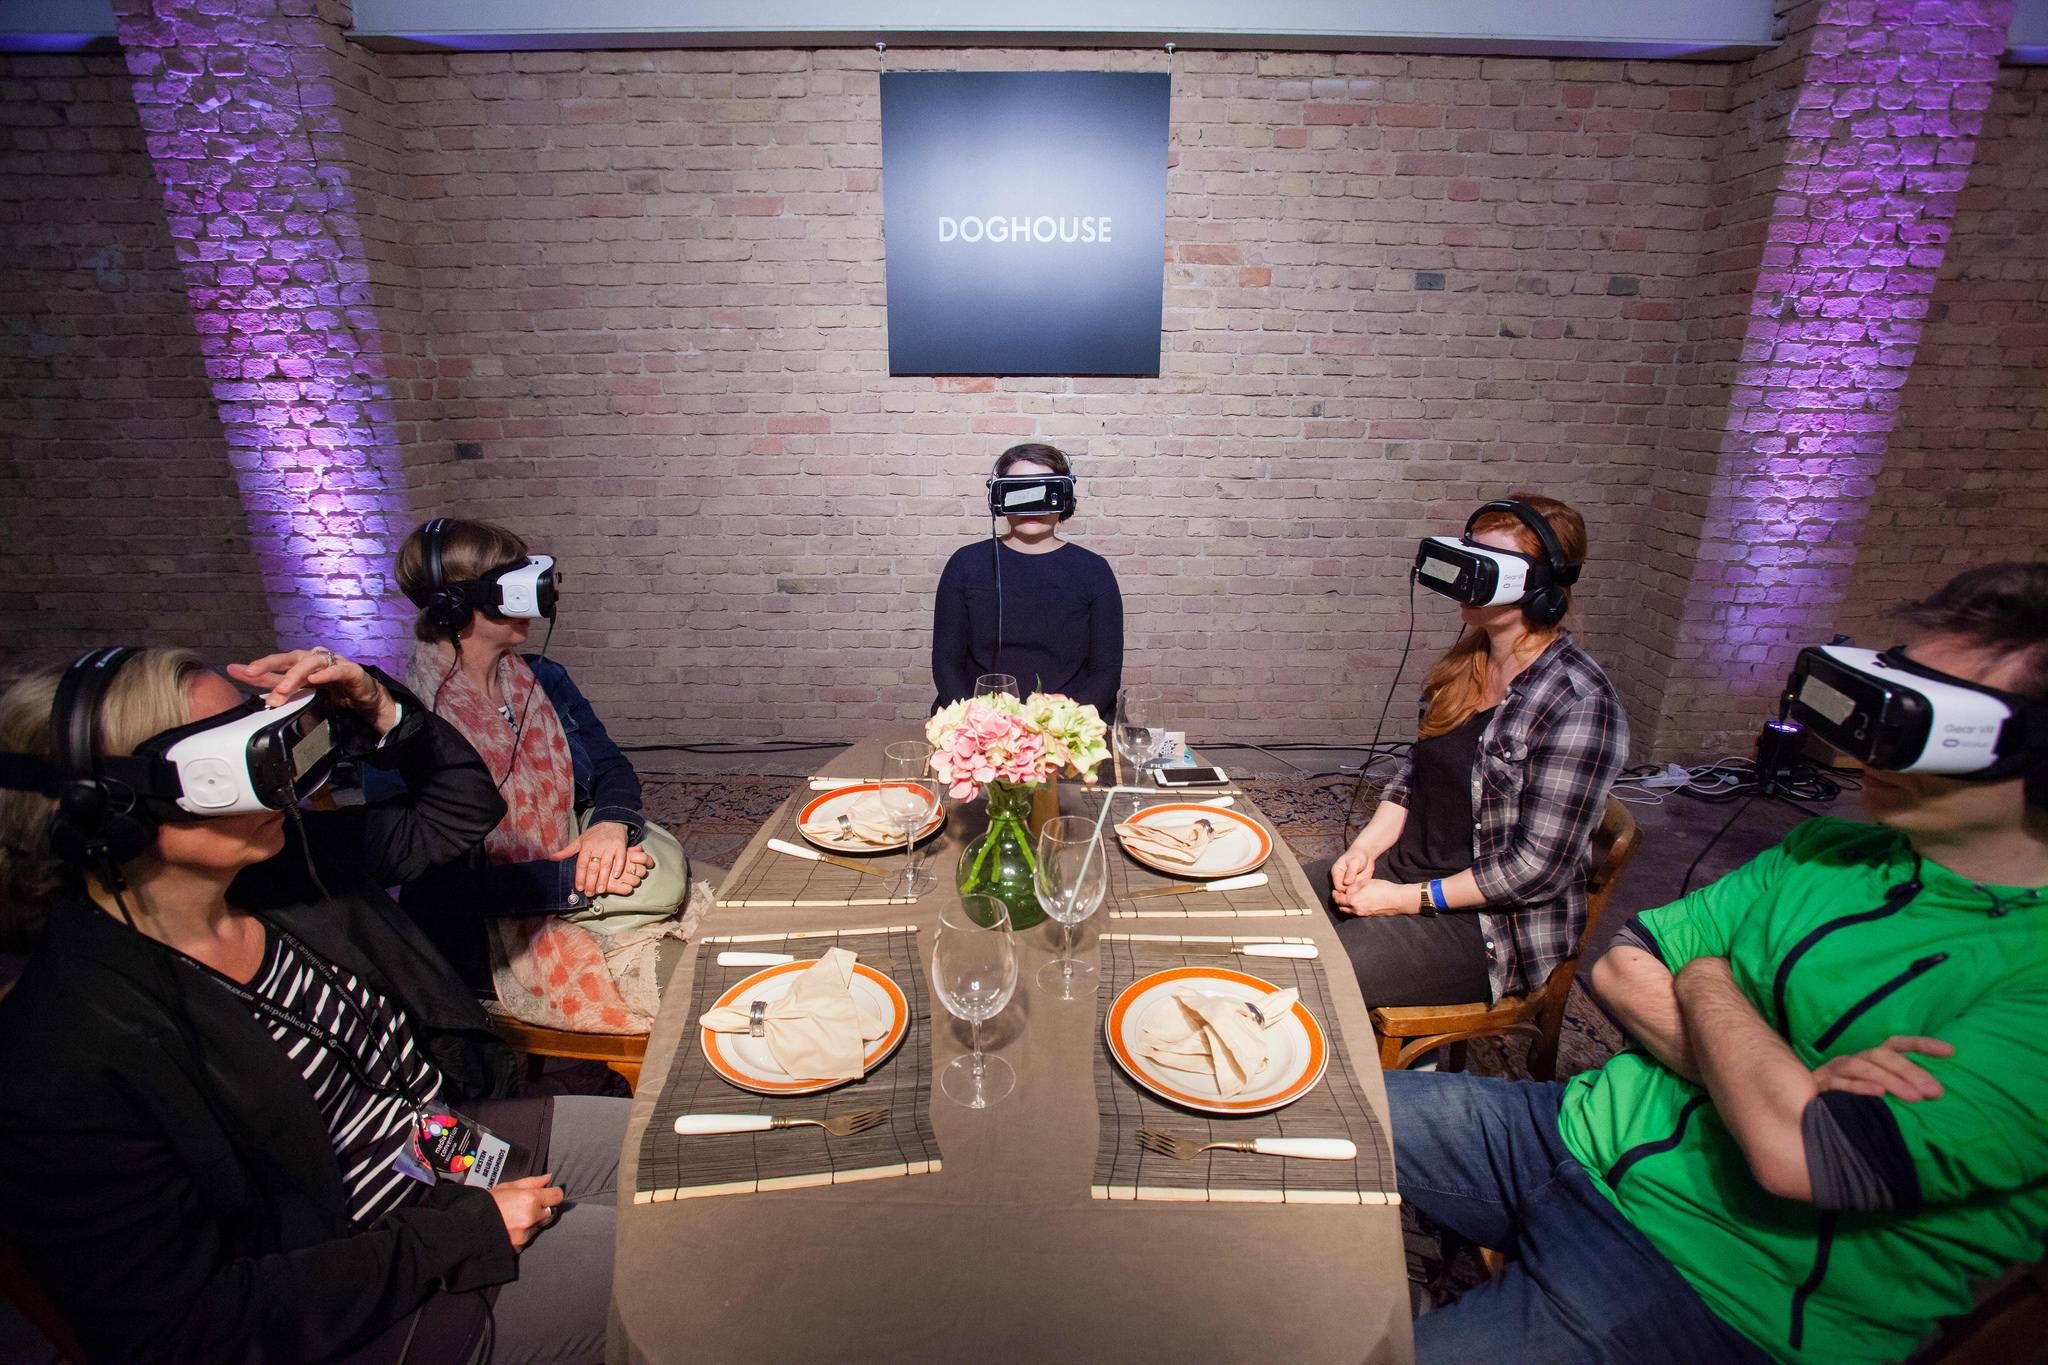 Multisensory VR could whet our appetites